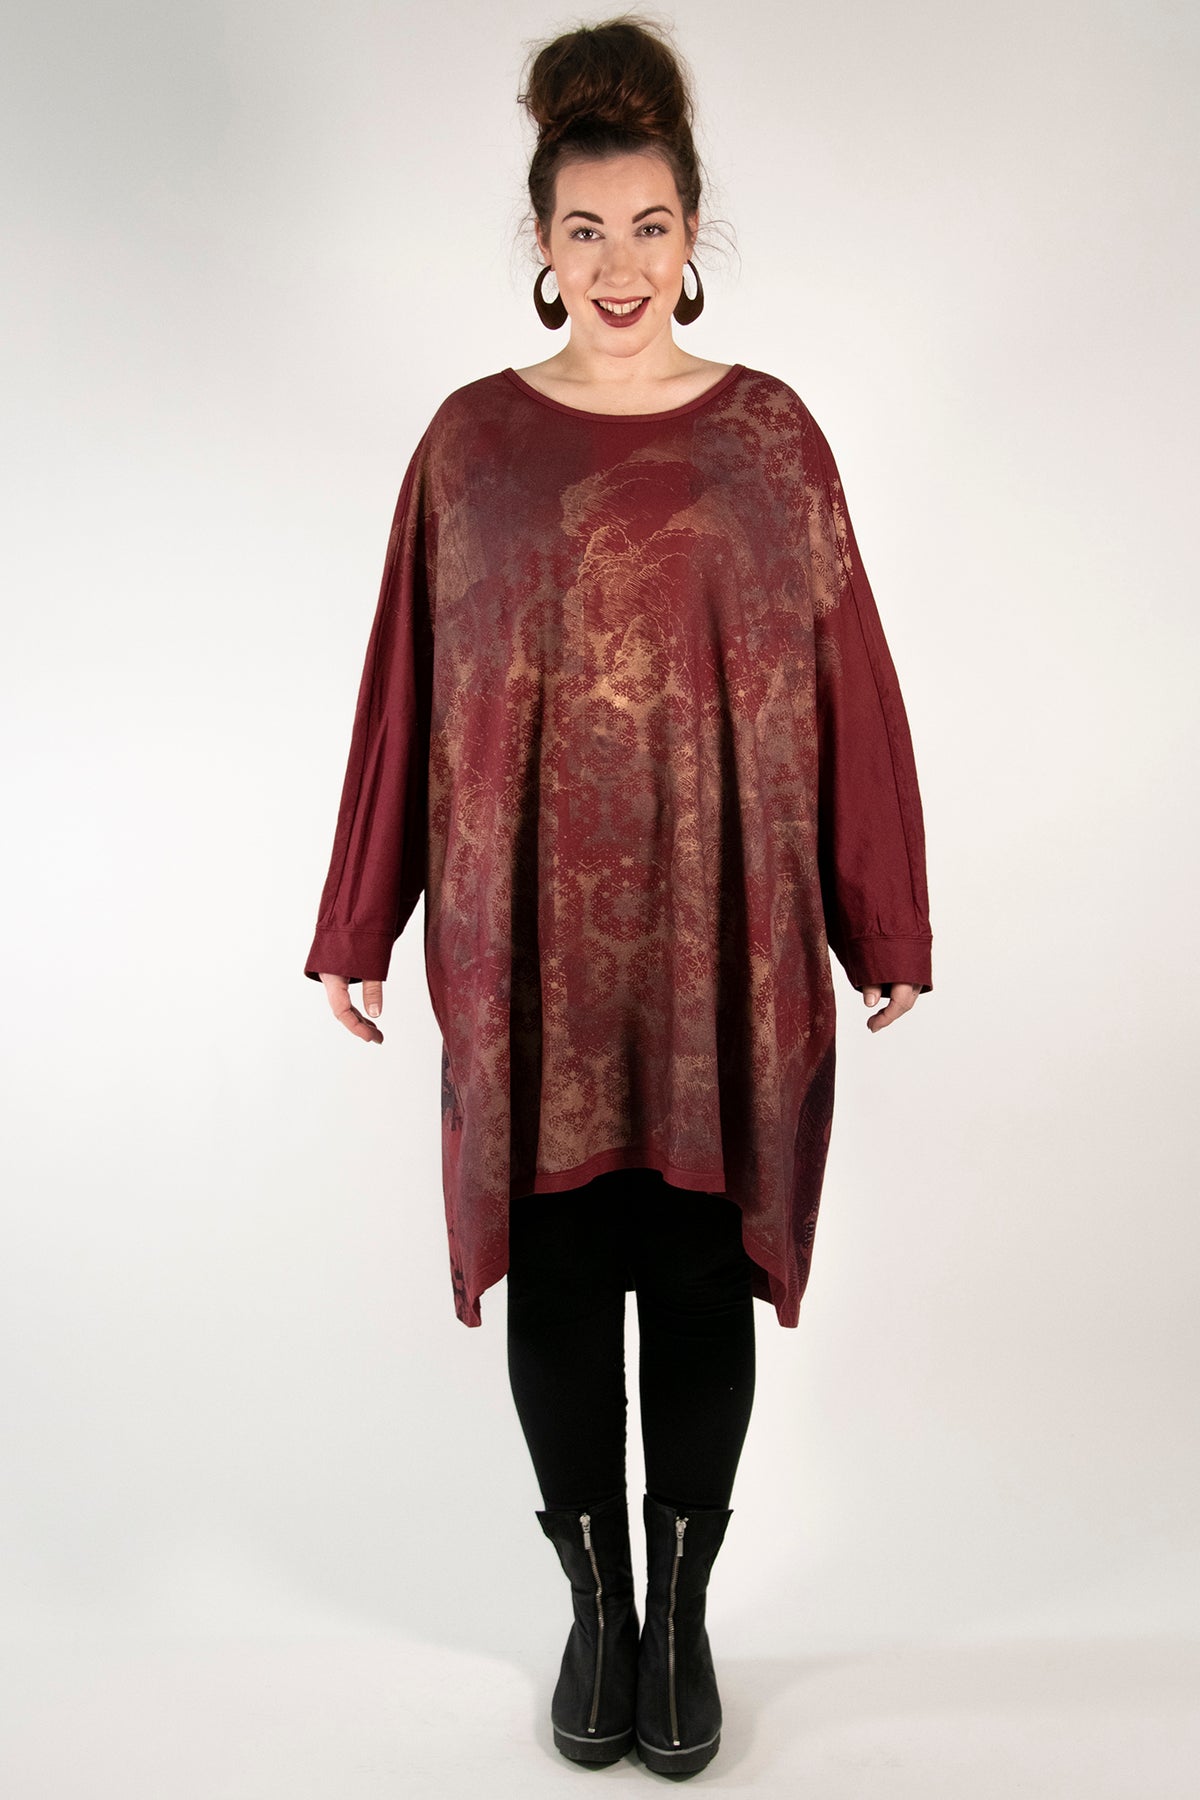 1258 Long Sleeve Limited Edition Oversized Tunic Tee-Sangria-P